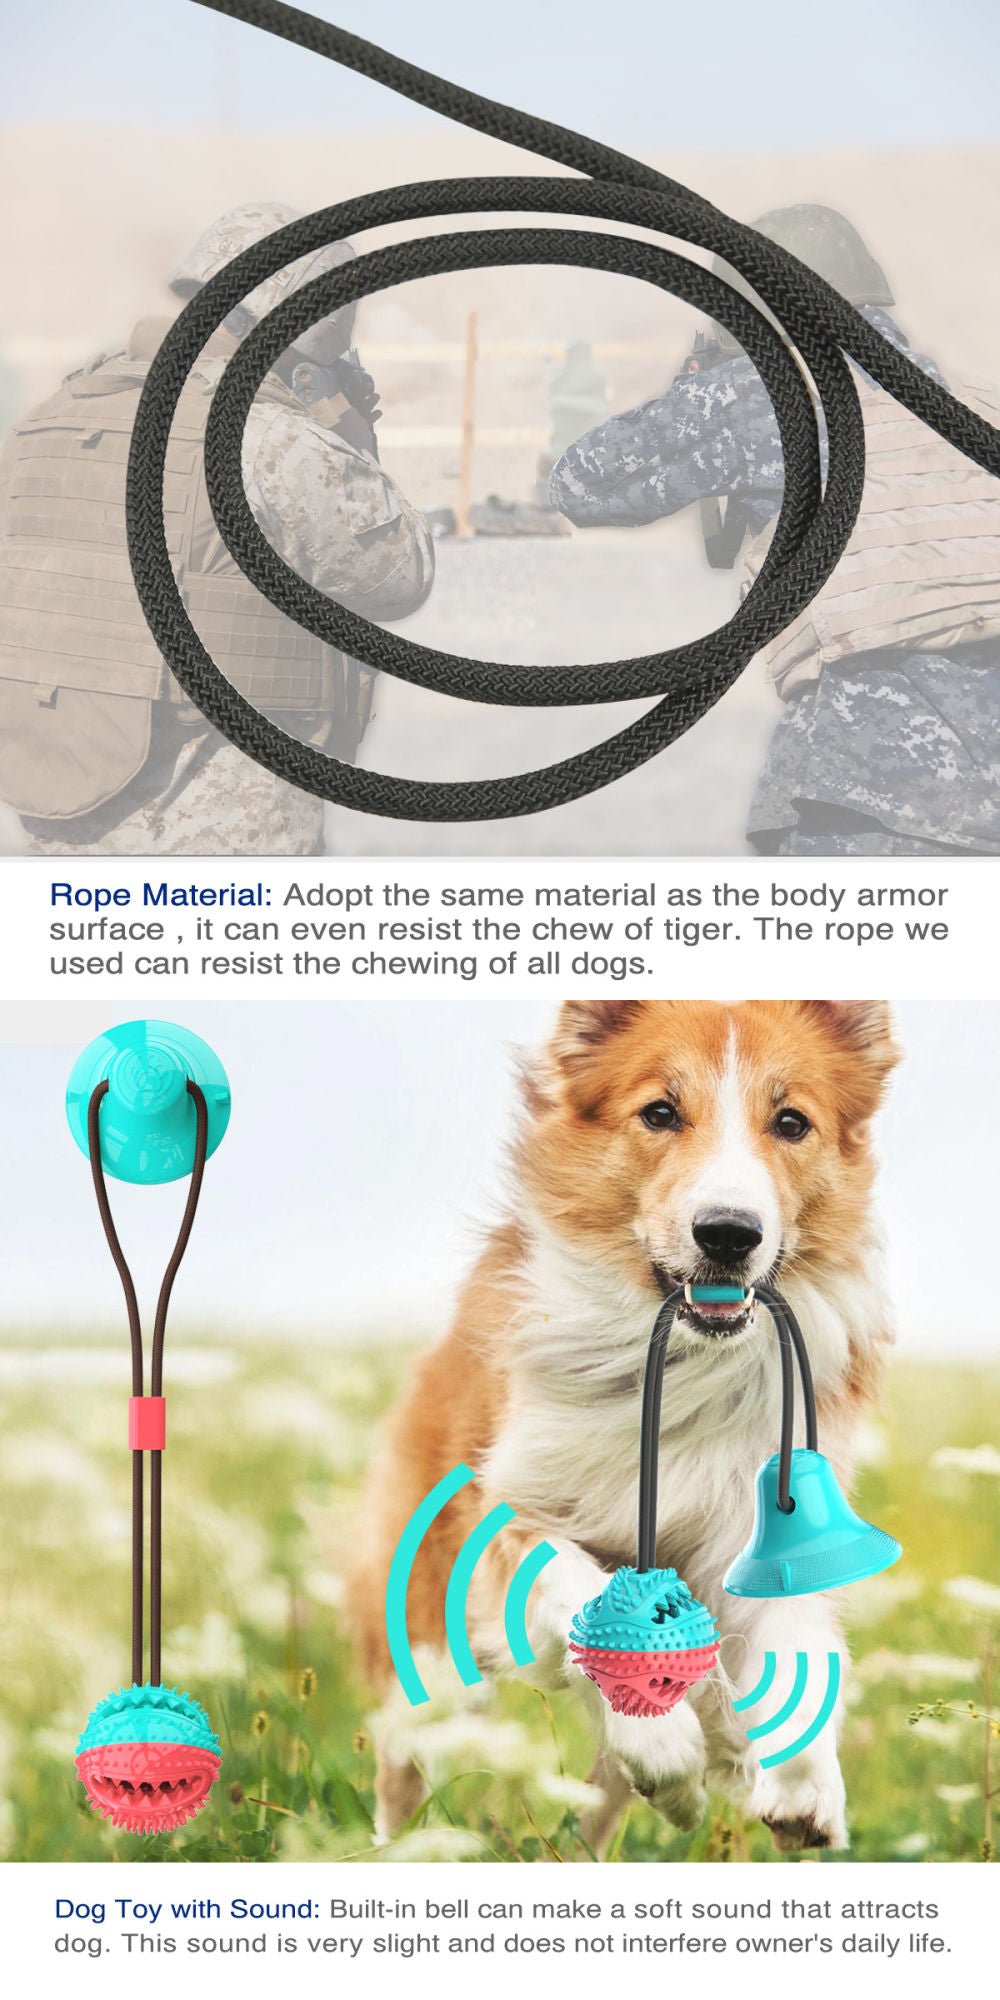 Dog Molar Bite Toy Multifunction Pet Chew Toys with Suction Cup Doggy Pull Ball for Dogs Cats Cleaning Tooth Food Dispenser NEW